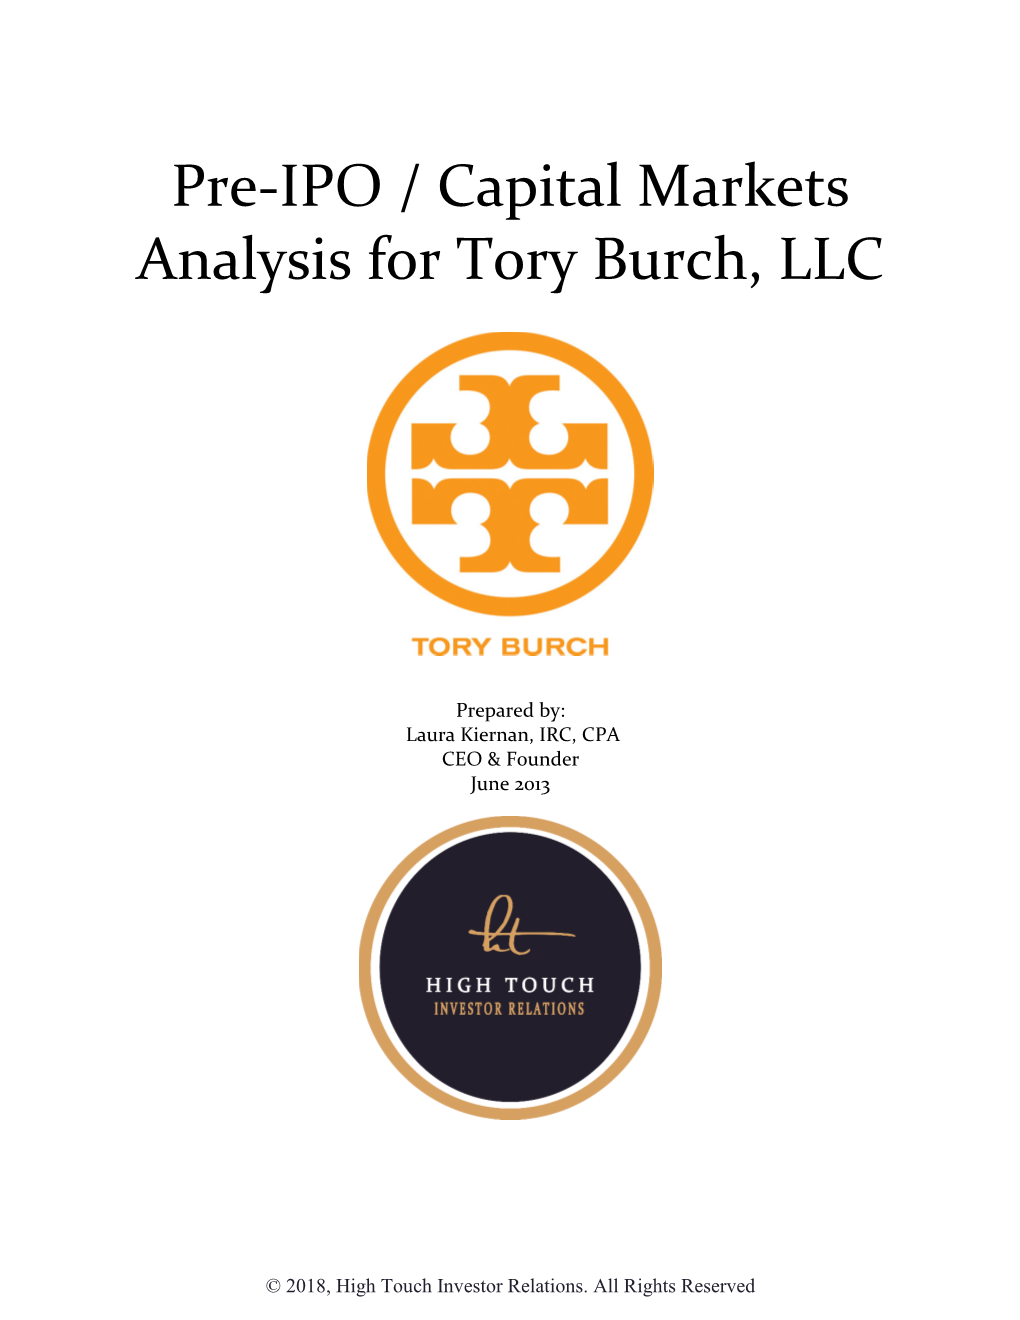 Pre-IPO / Capital Markets Analysis for Tory Burch, LLC